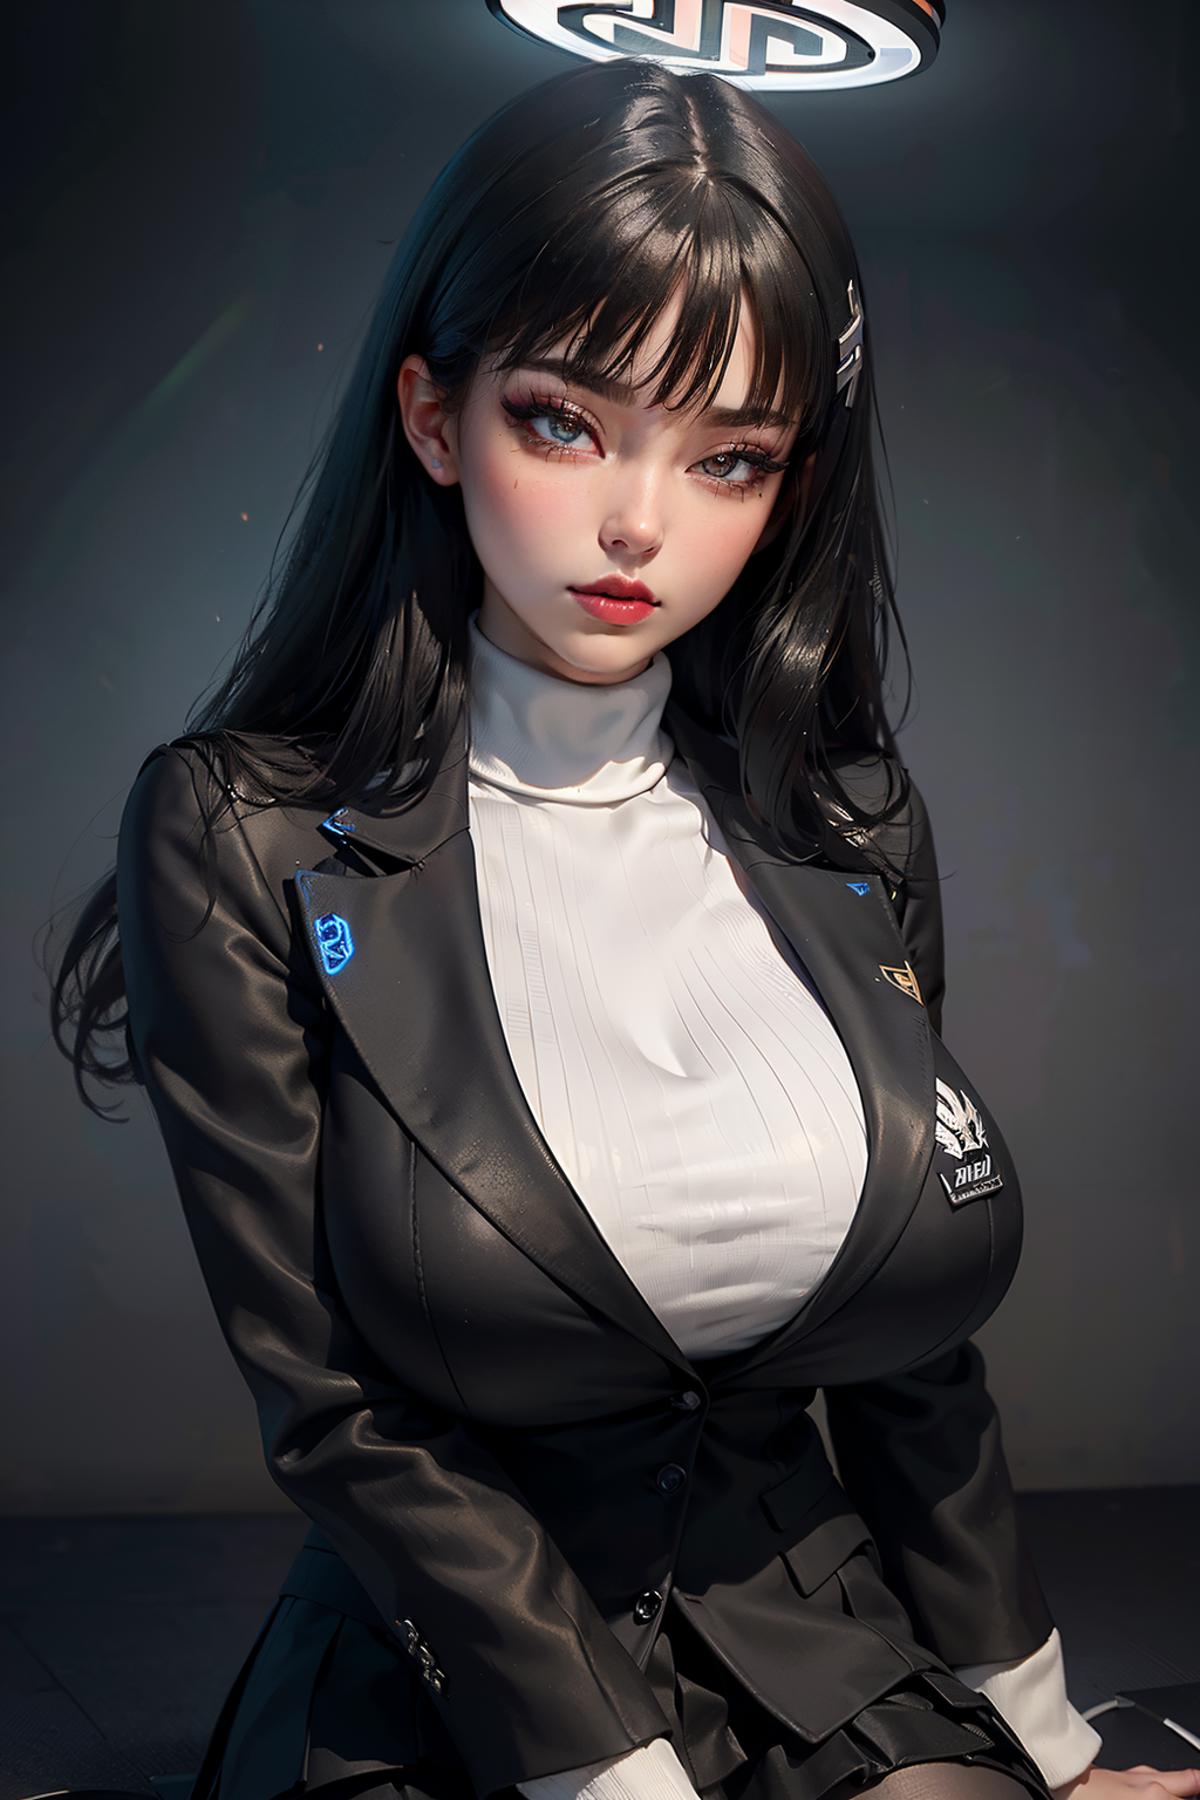 AI model image by EndReal